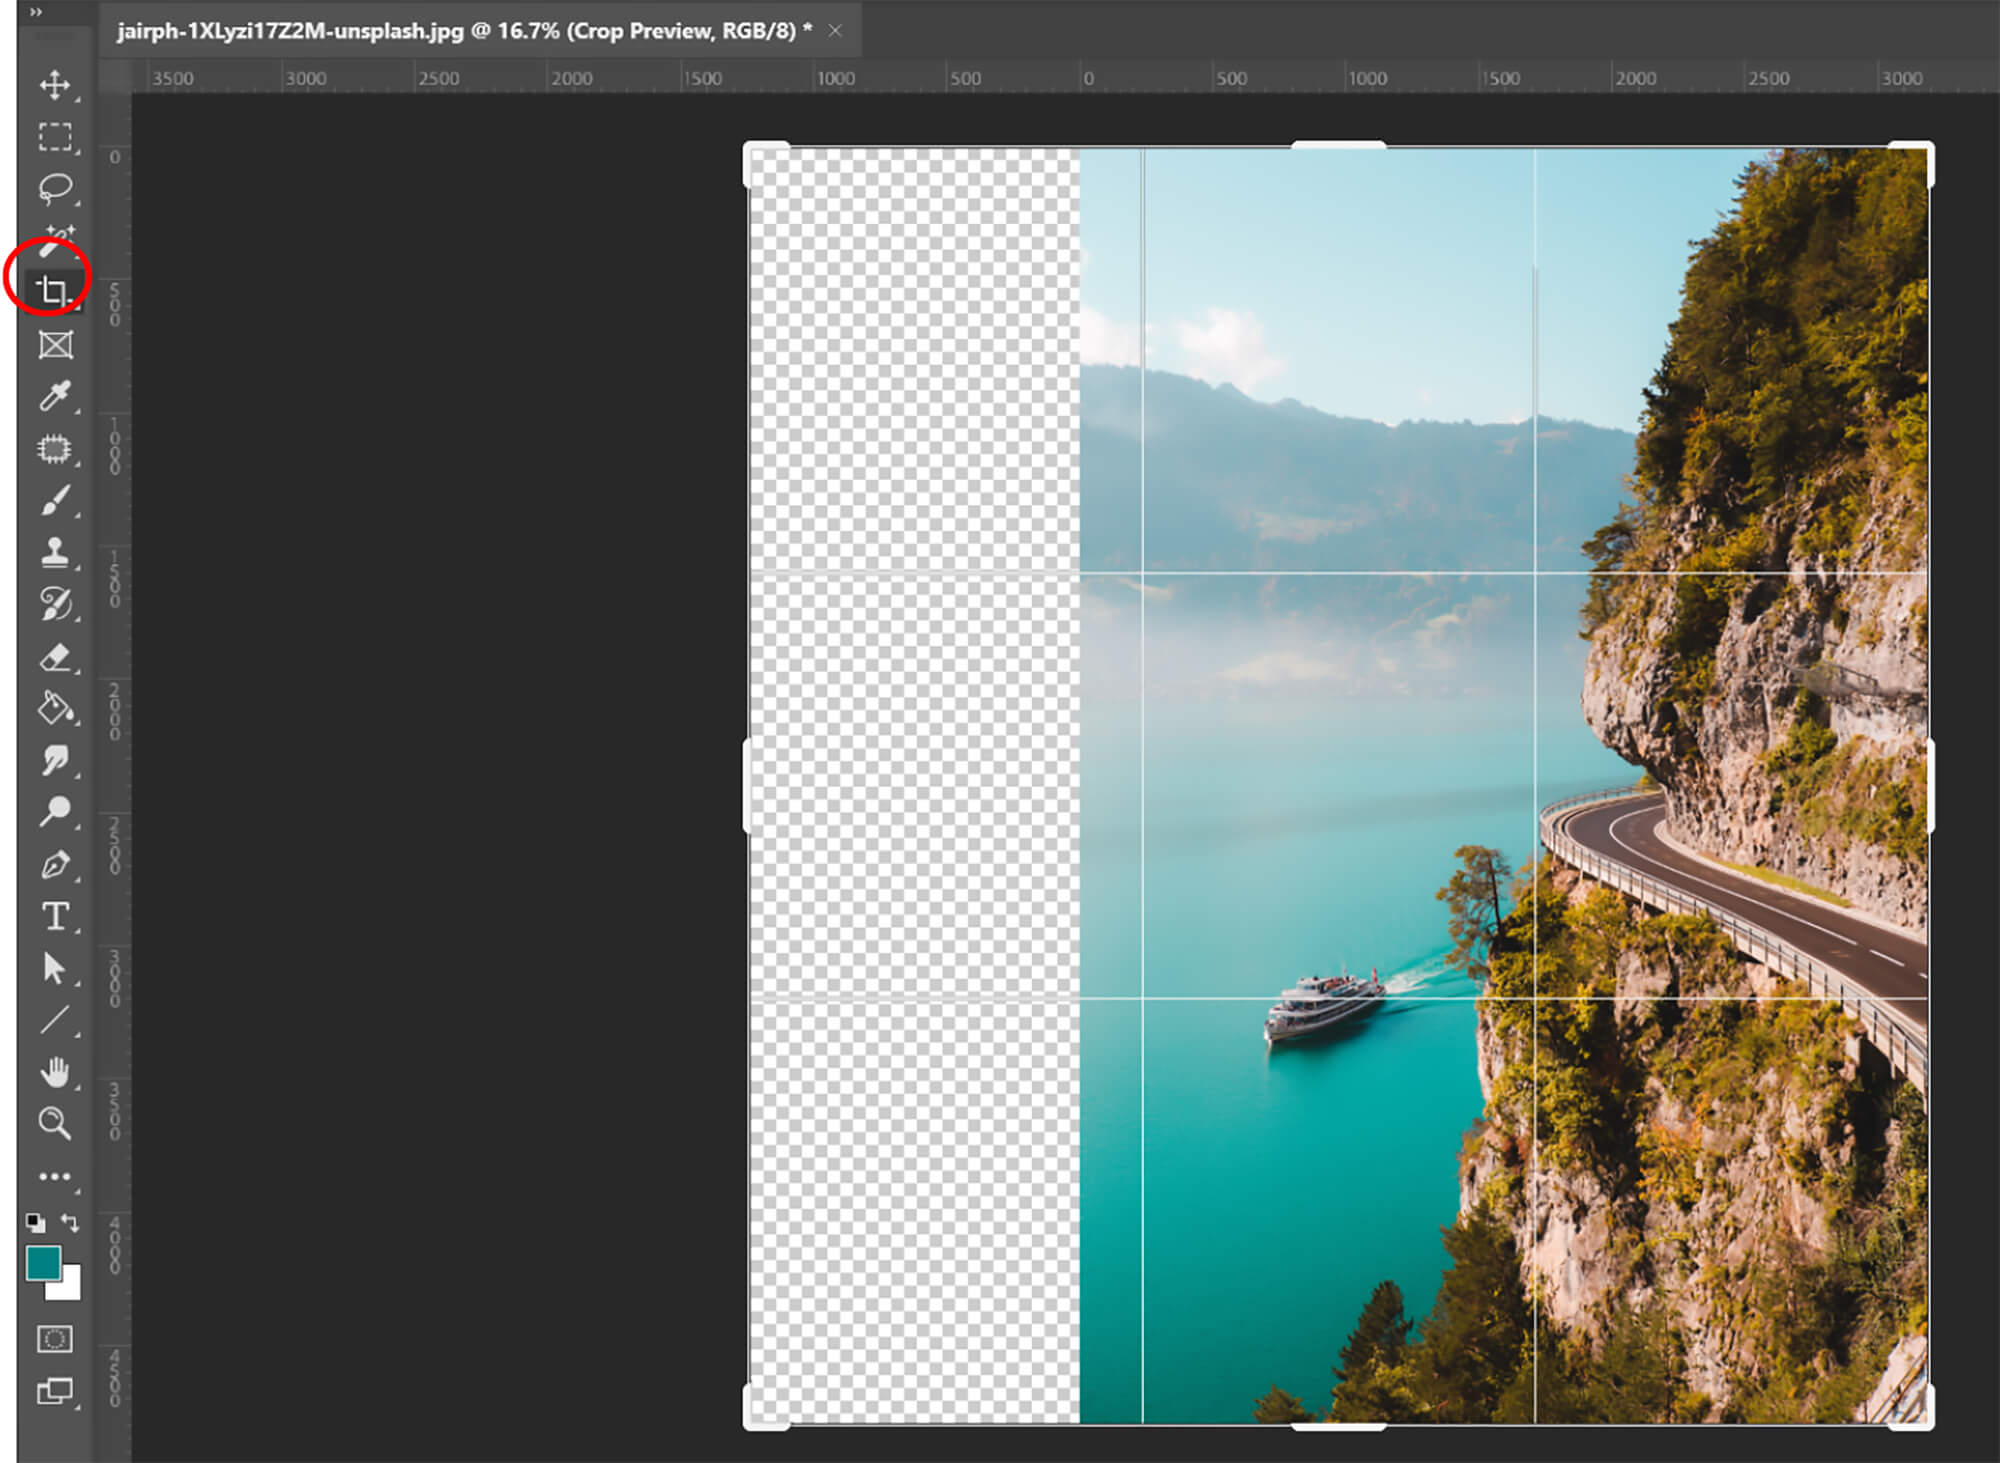 Editing Image of a scenery